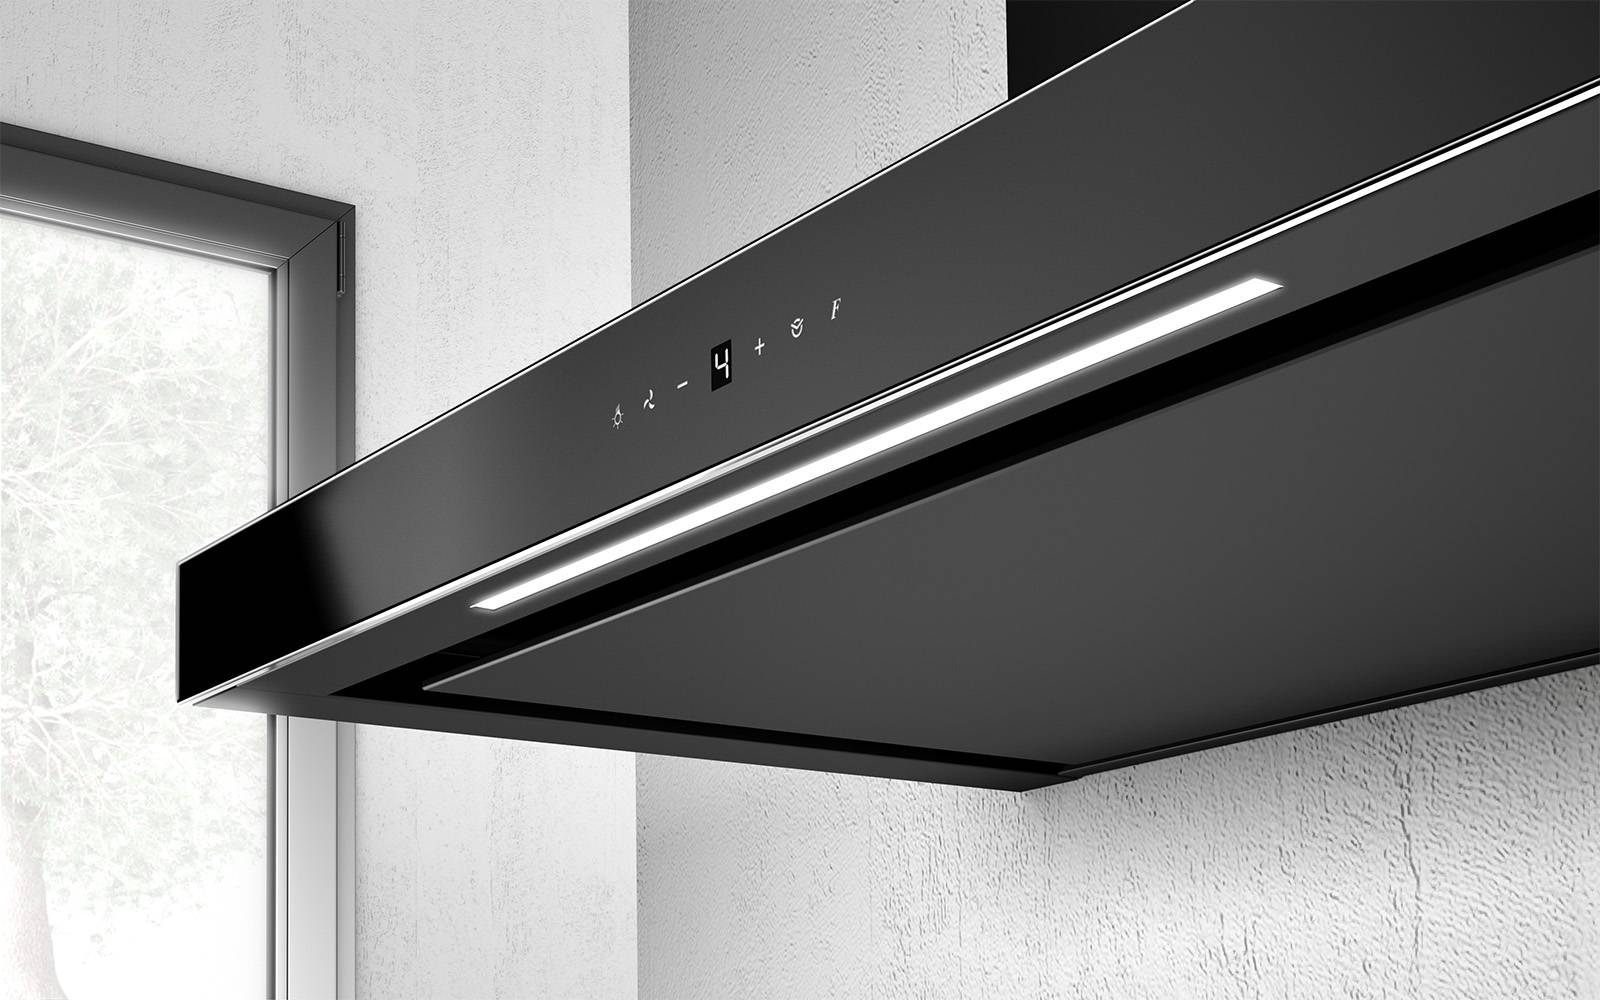 Airforce F213 90cm Wall Mounted Cooker Hood with Touch Control - Black Finish